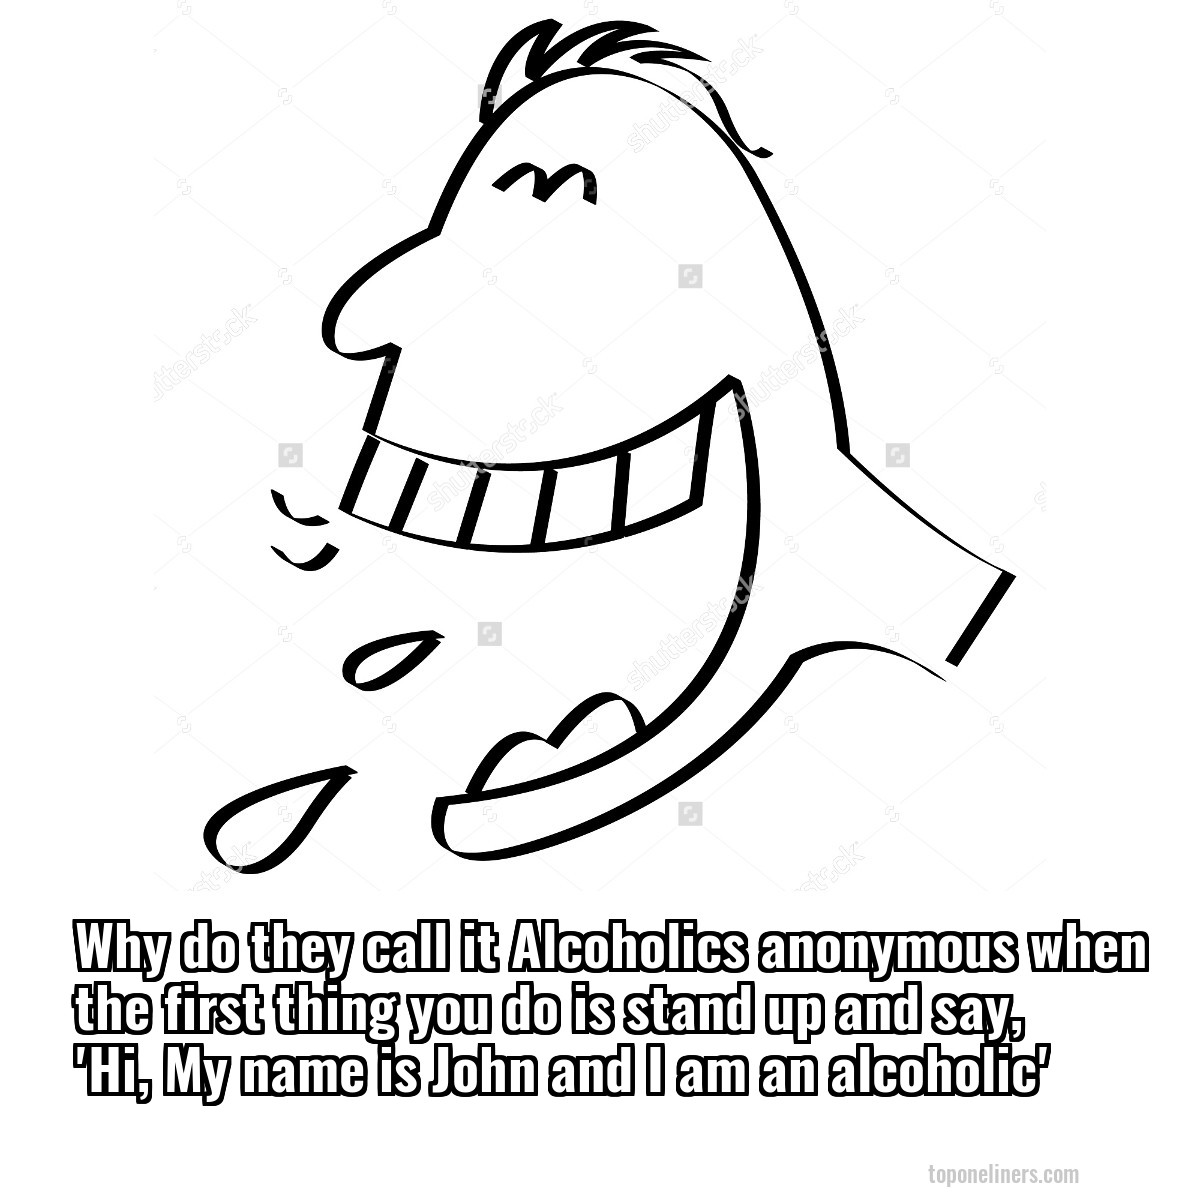 Why do they call it Alcoholics anonymous when the first thing you do is stand up and say, 'Hi, My name is John and I am an alcoholic'
